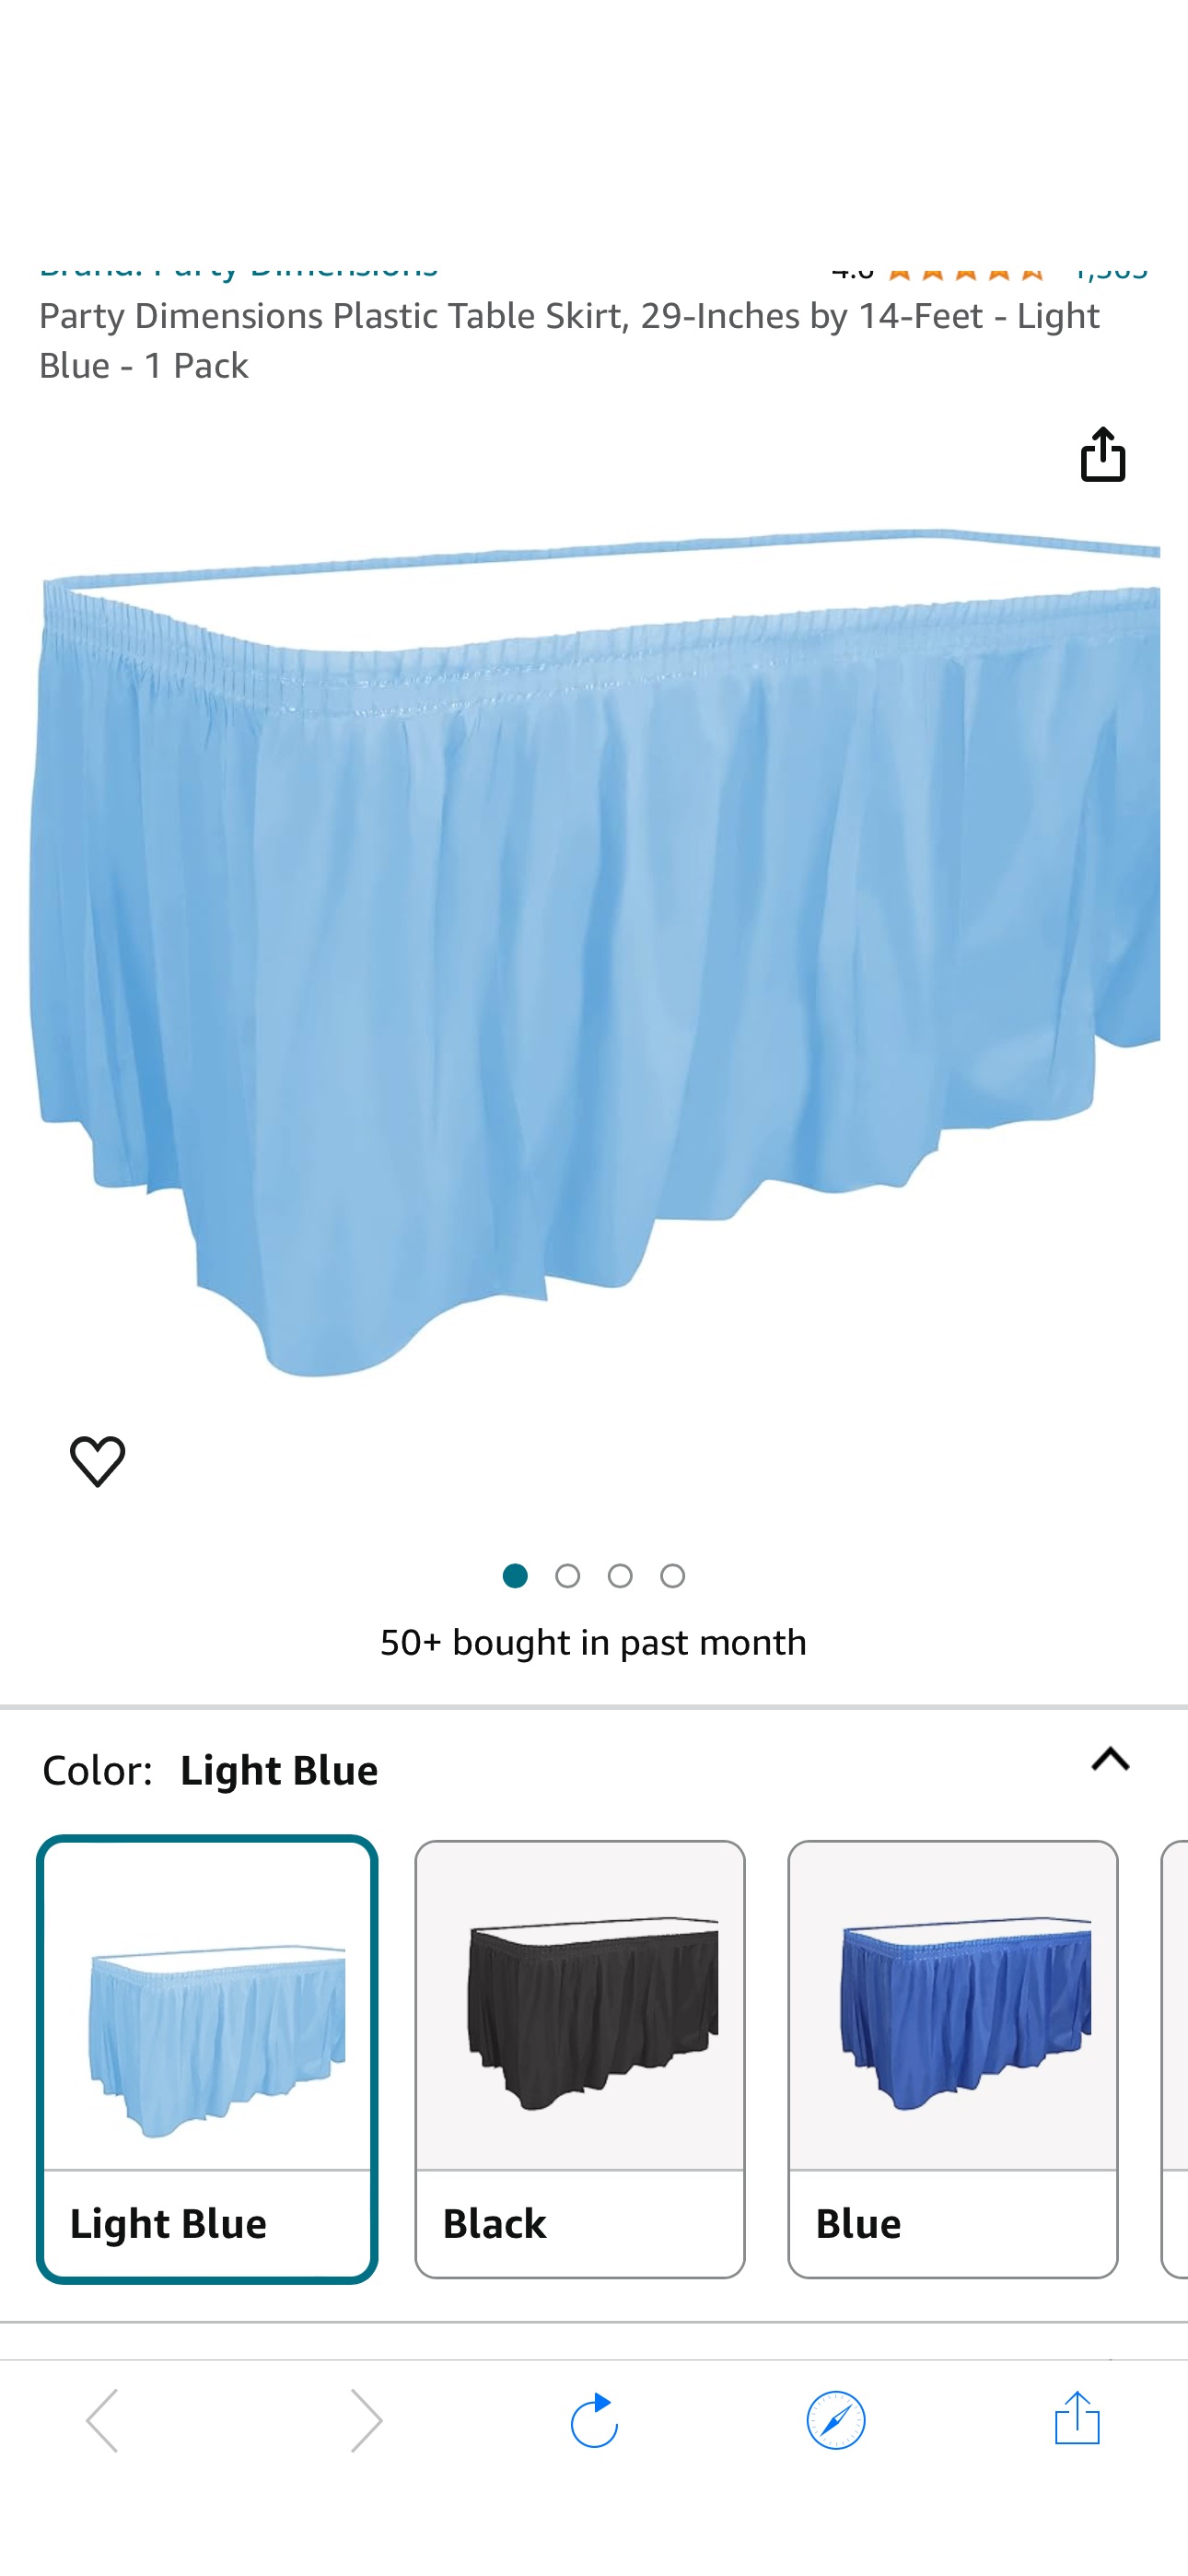 Amazon.com: Party Dimensions Plastic Table Skirt, 29-Inches by 14-Feet - Light Blue - 1 Pack : Home & Kitchen